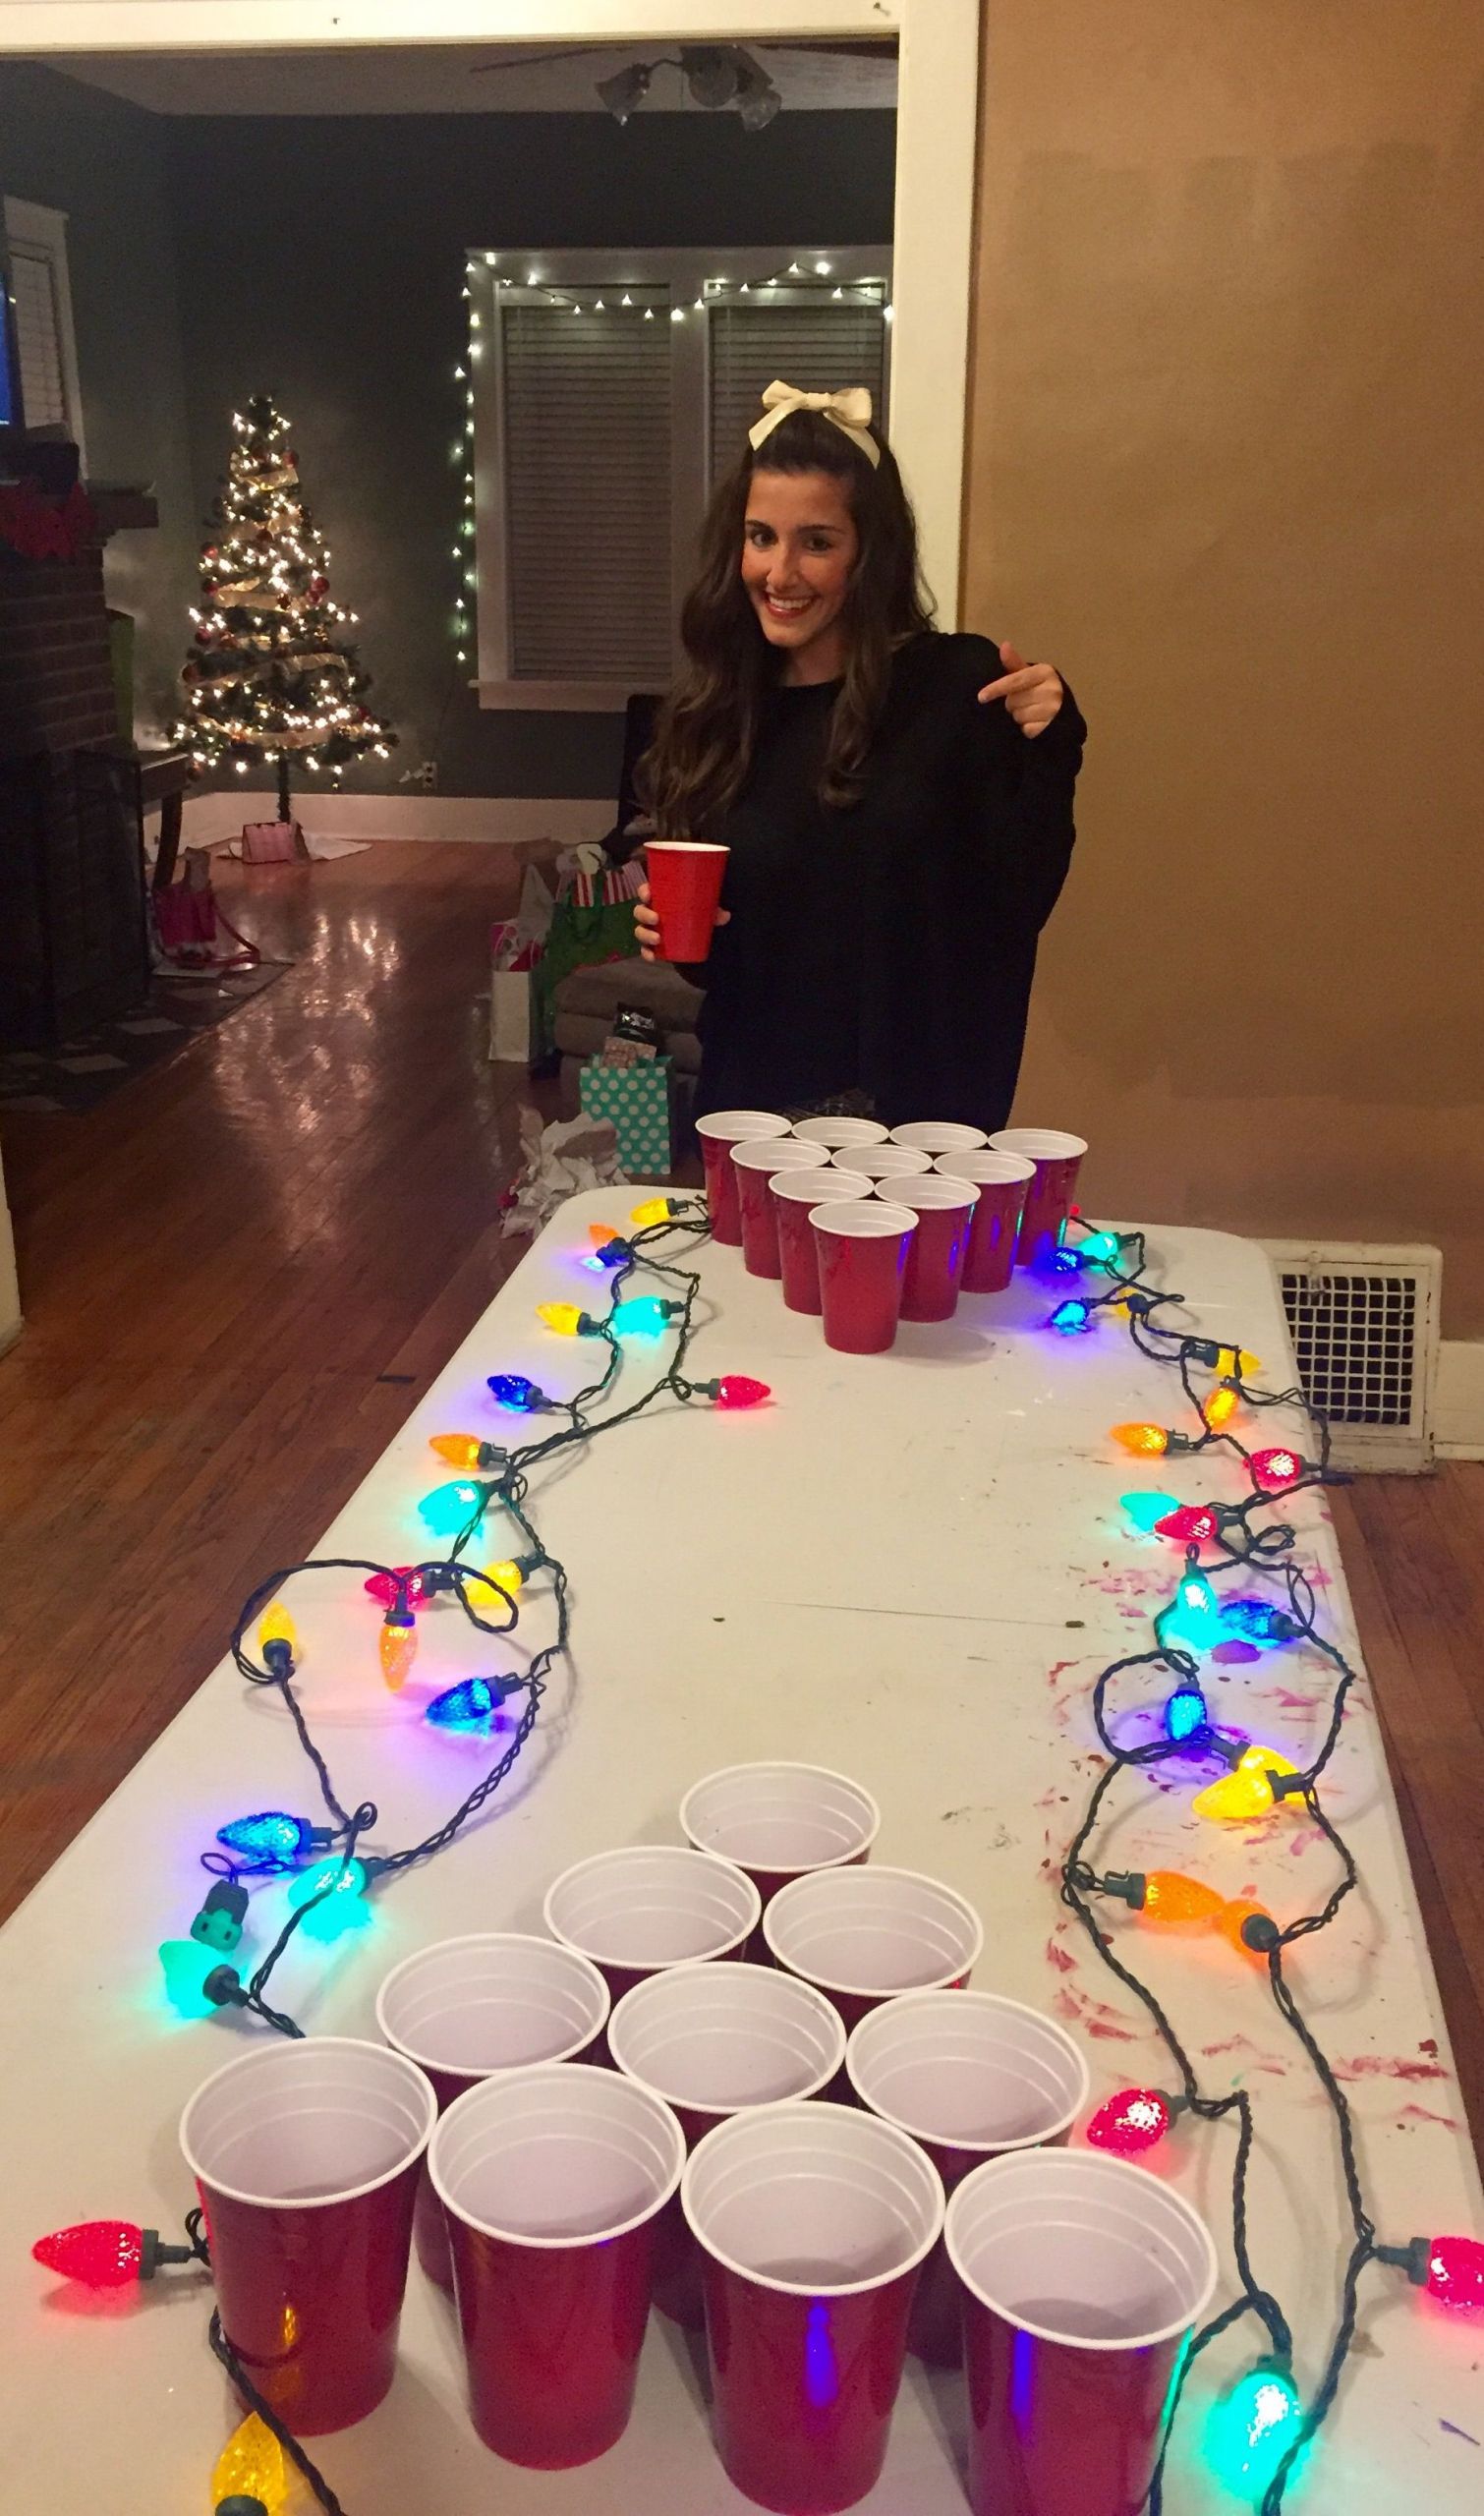 Christmas Party Themes Ideas For Adults
 Making the beer pong table festive TSM